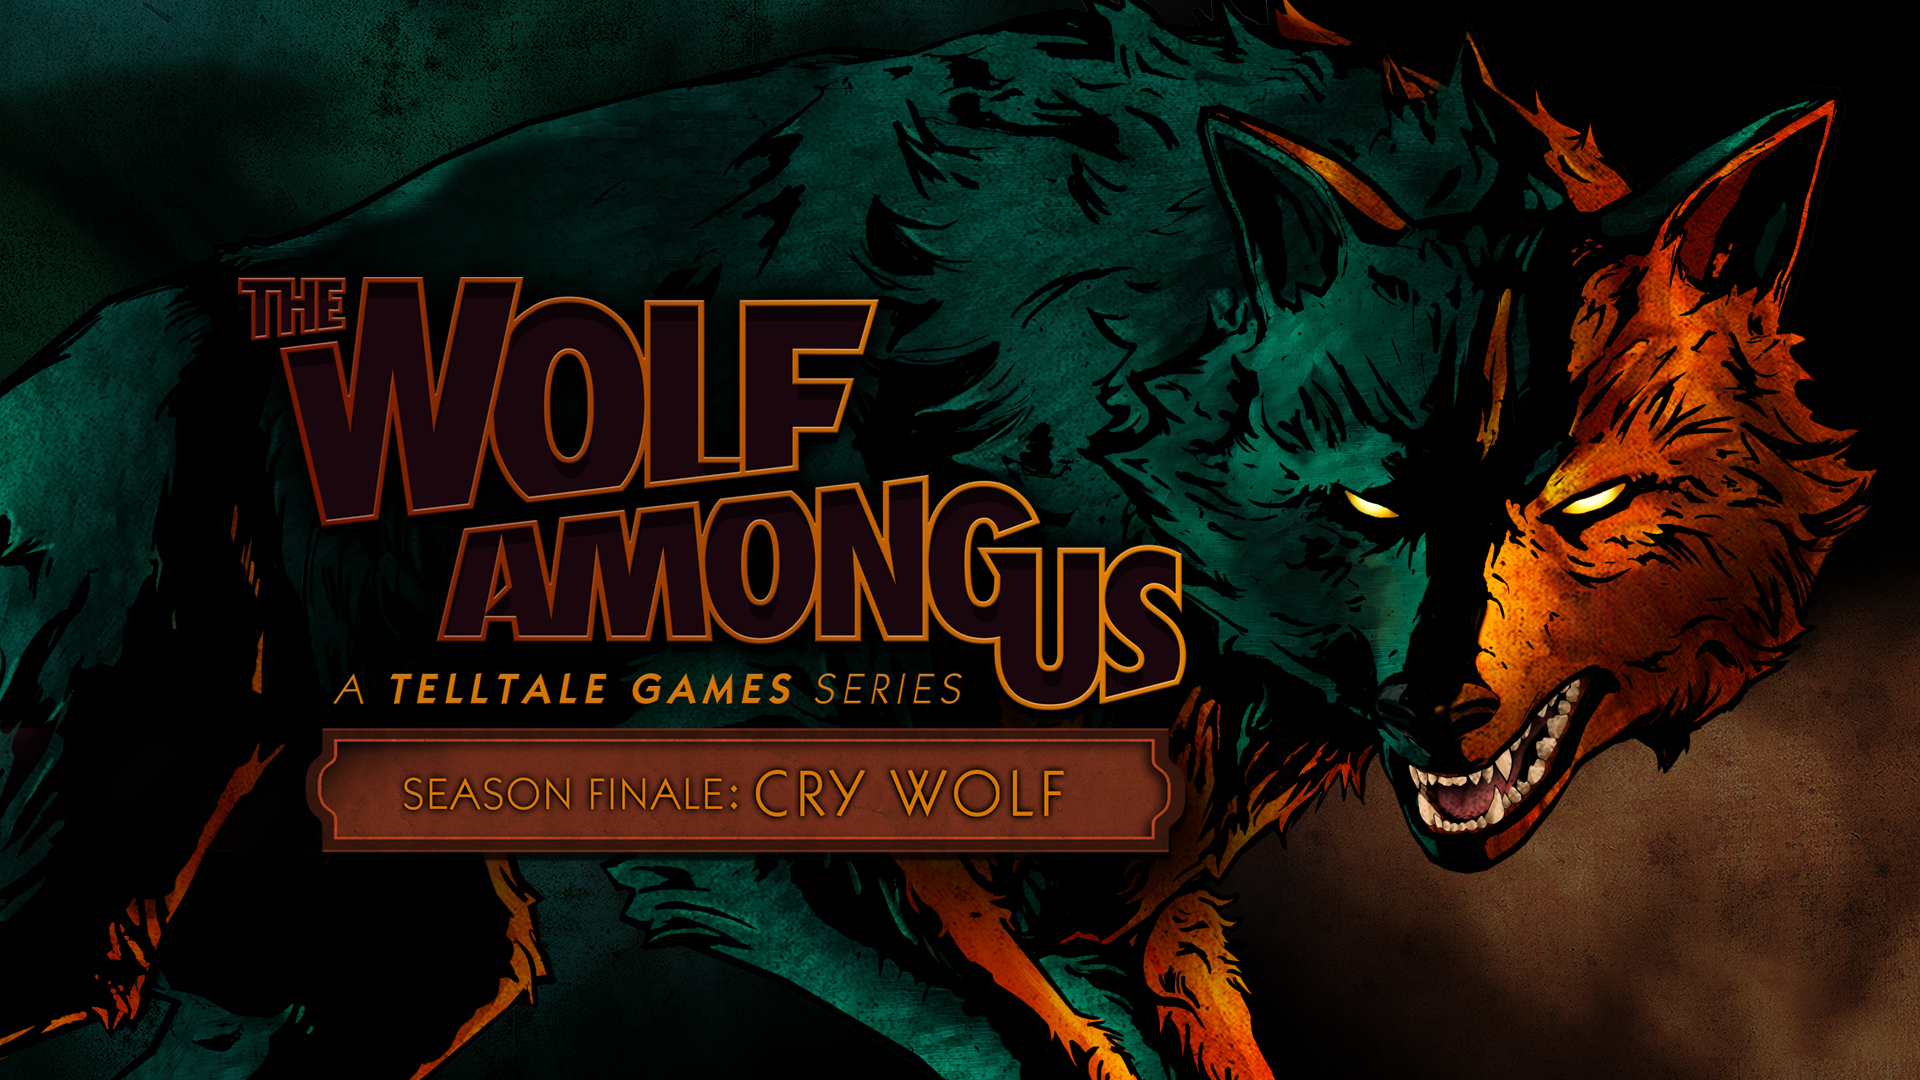 The Wolf Among Us Episode 5 available now